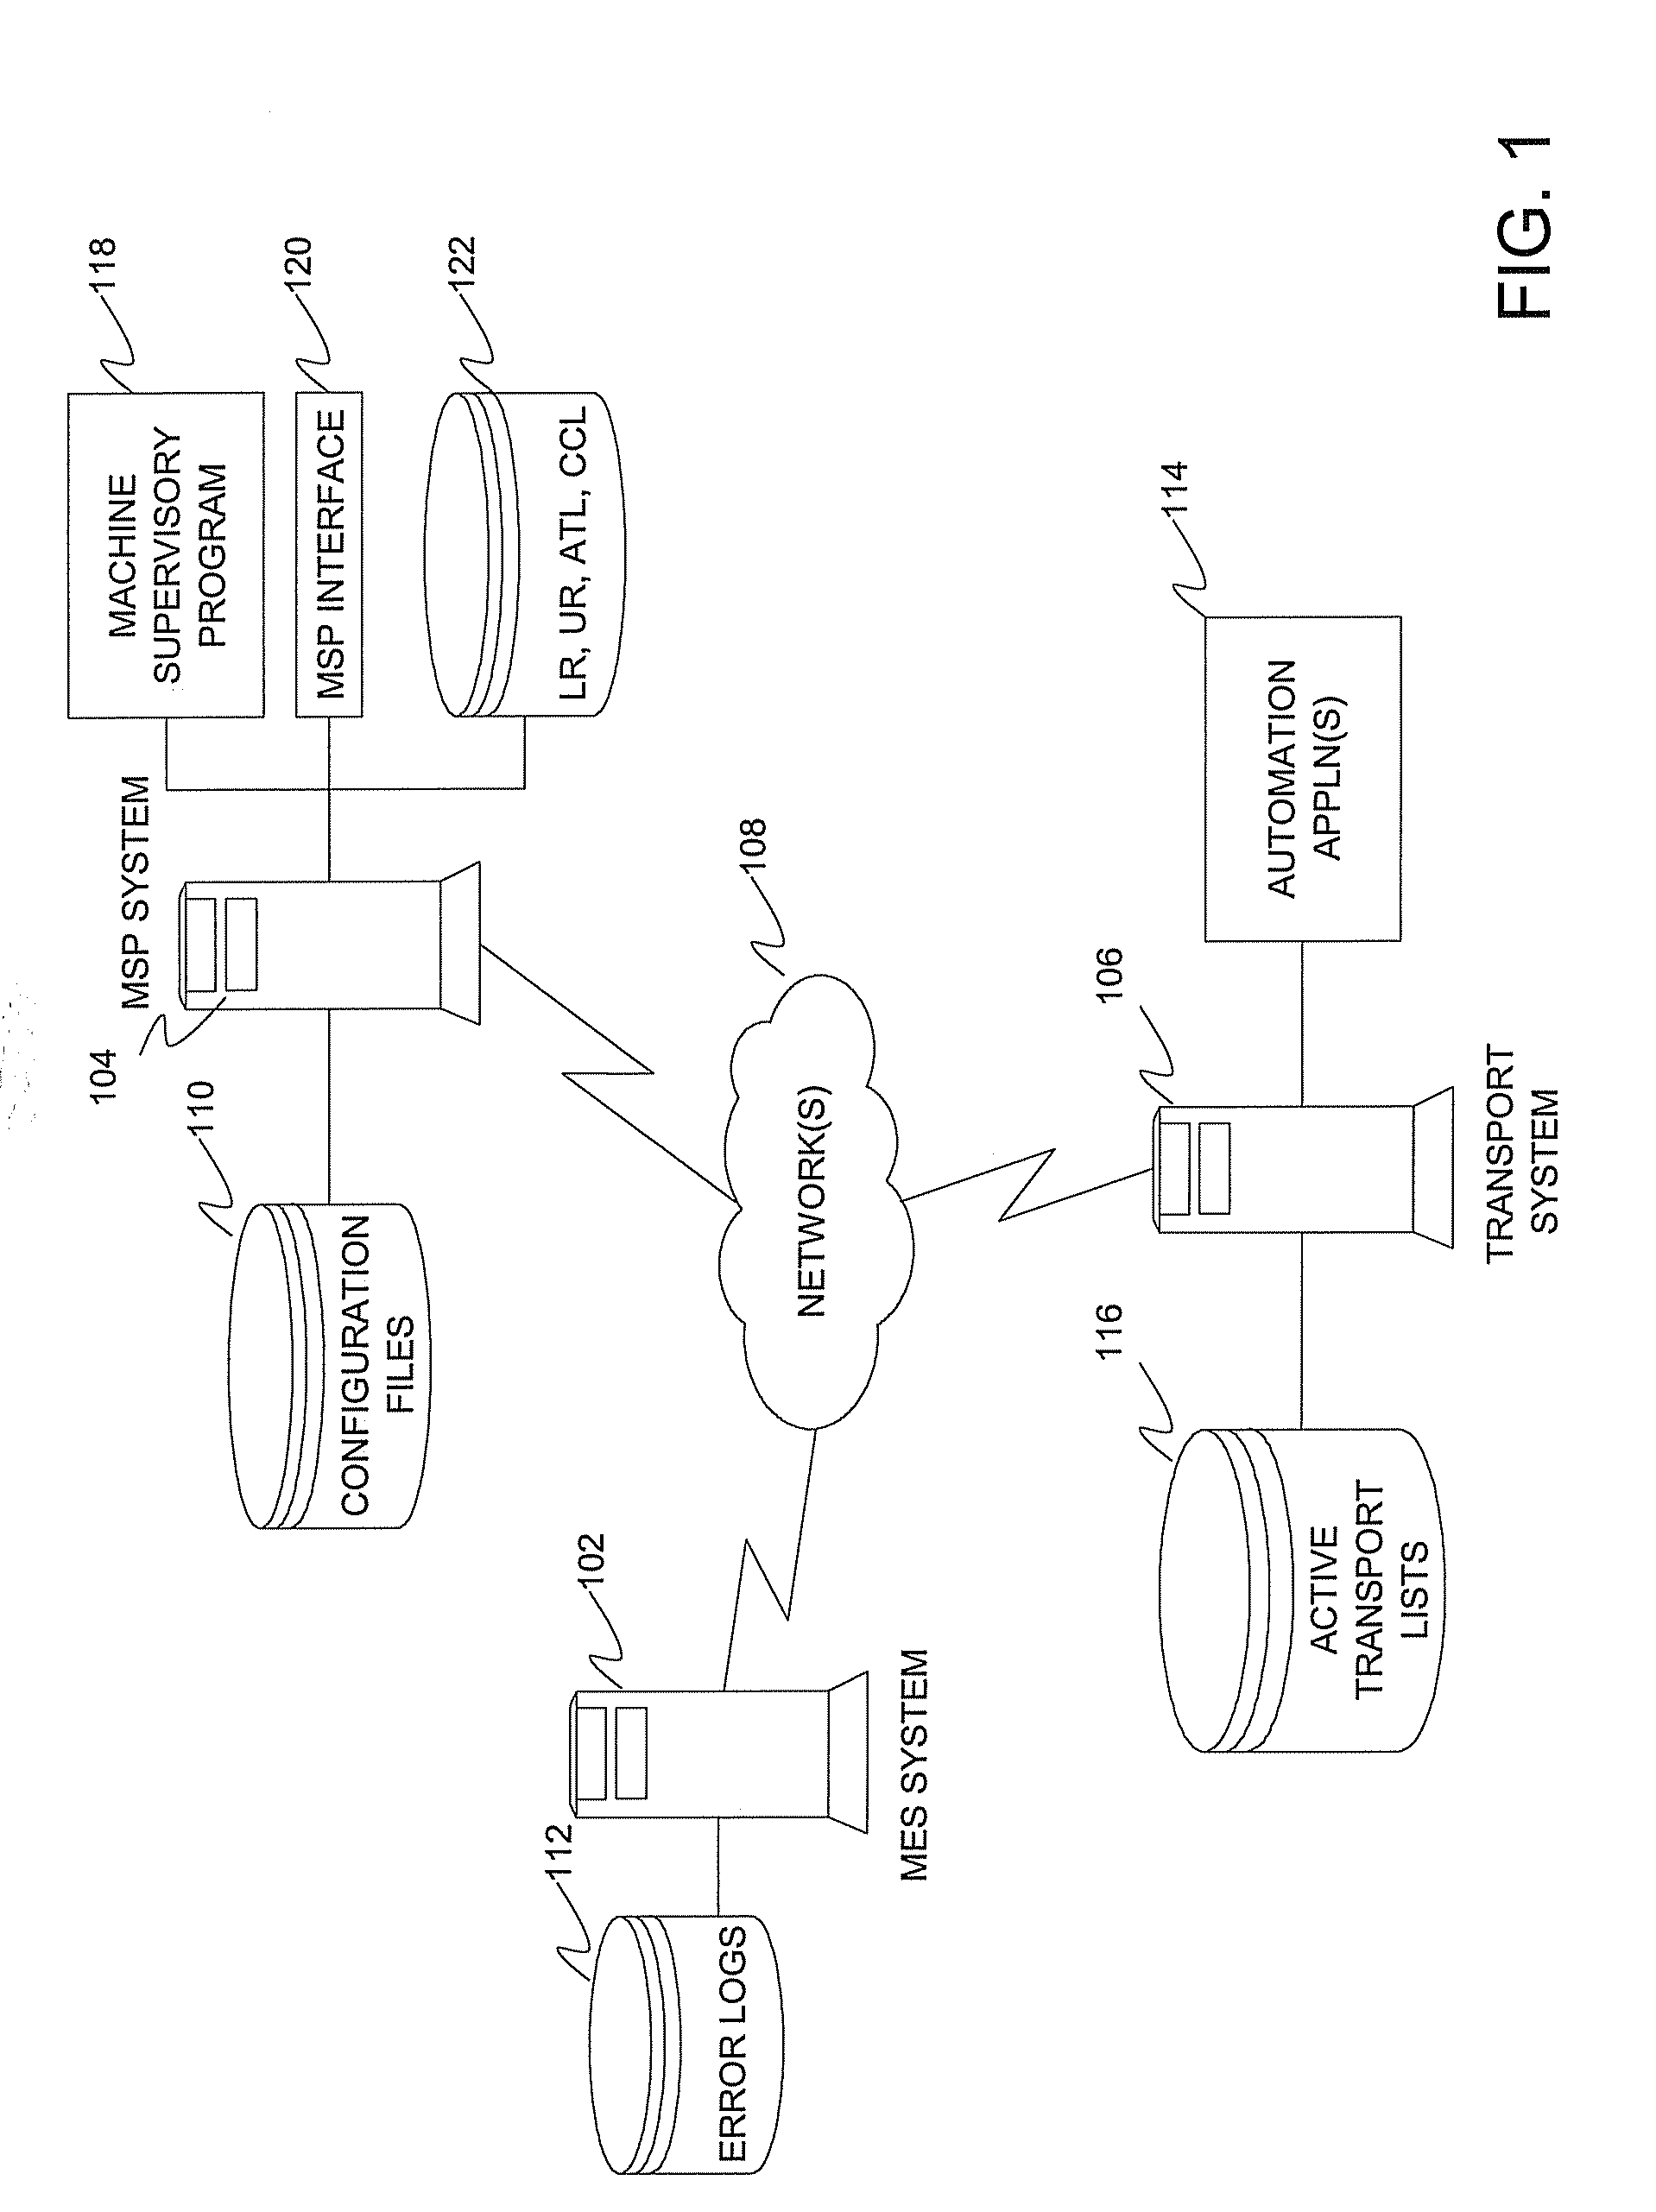 Method, system, and computer program product for providing a program interface for communications between a manufacturing execution system and a transport system